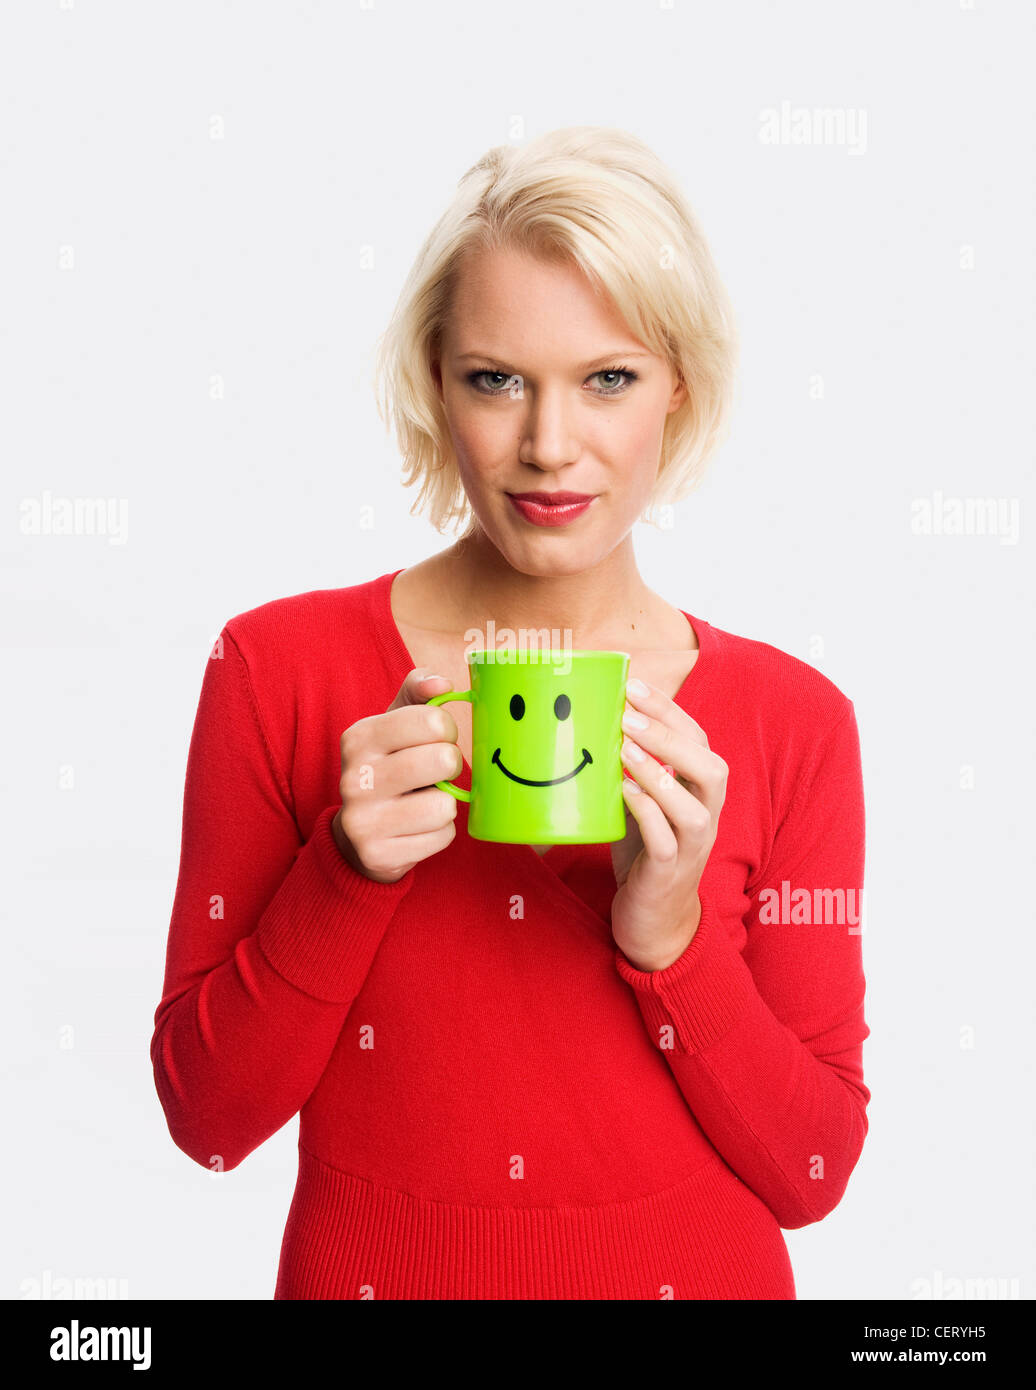 Female holding a green mug with a smiley face Stock Photo